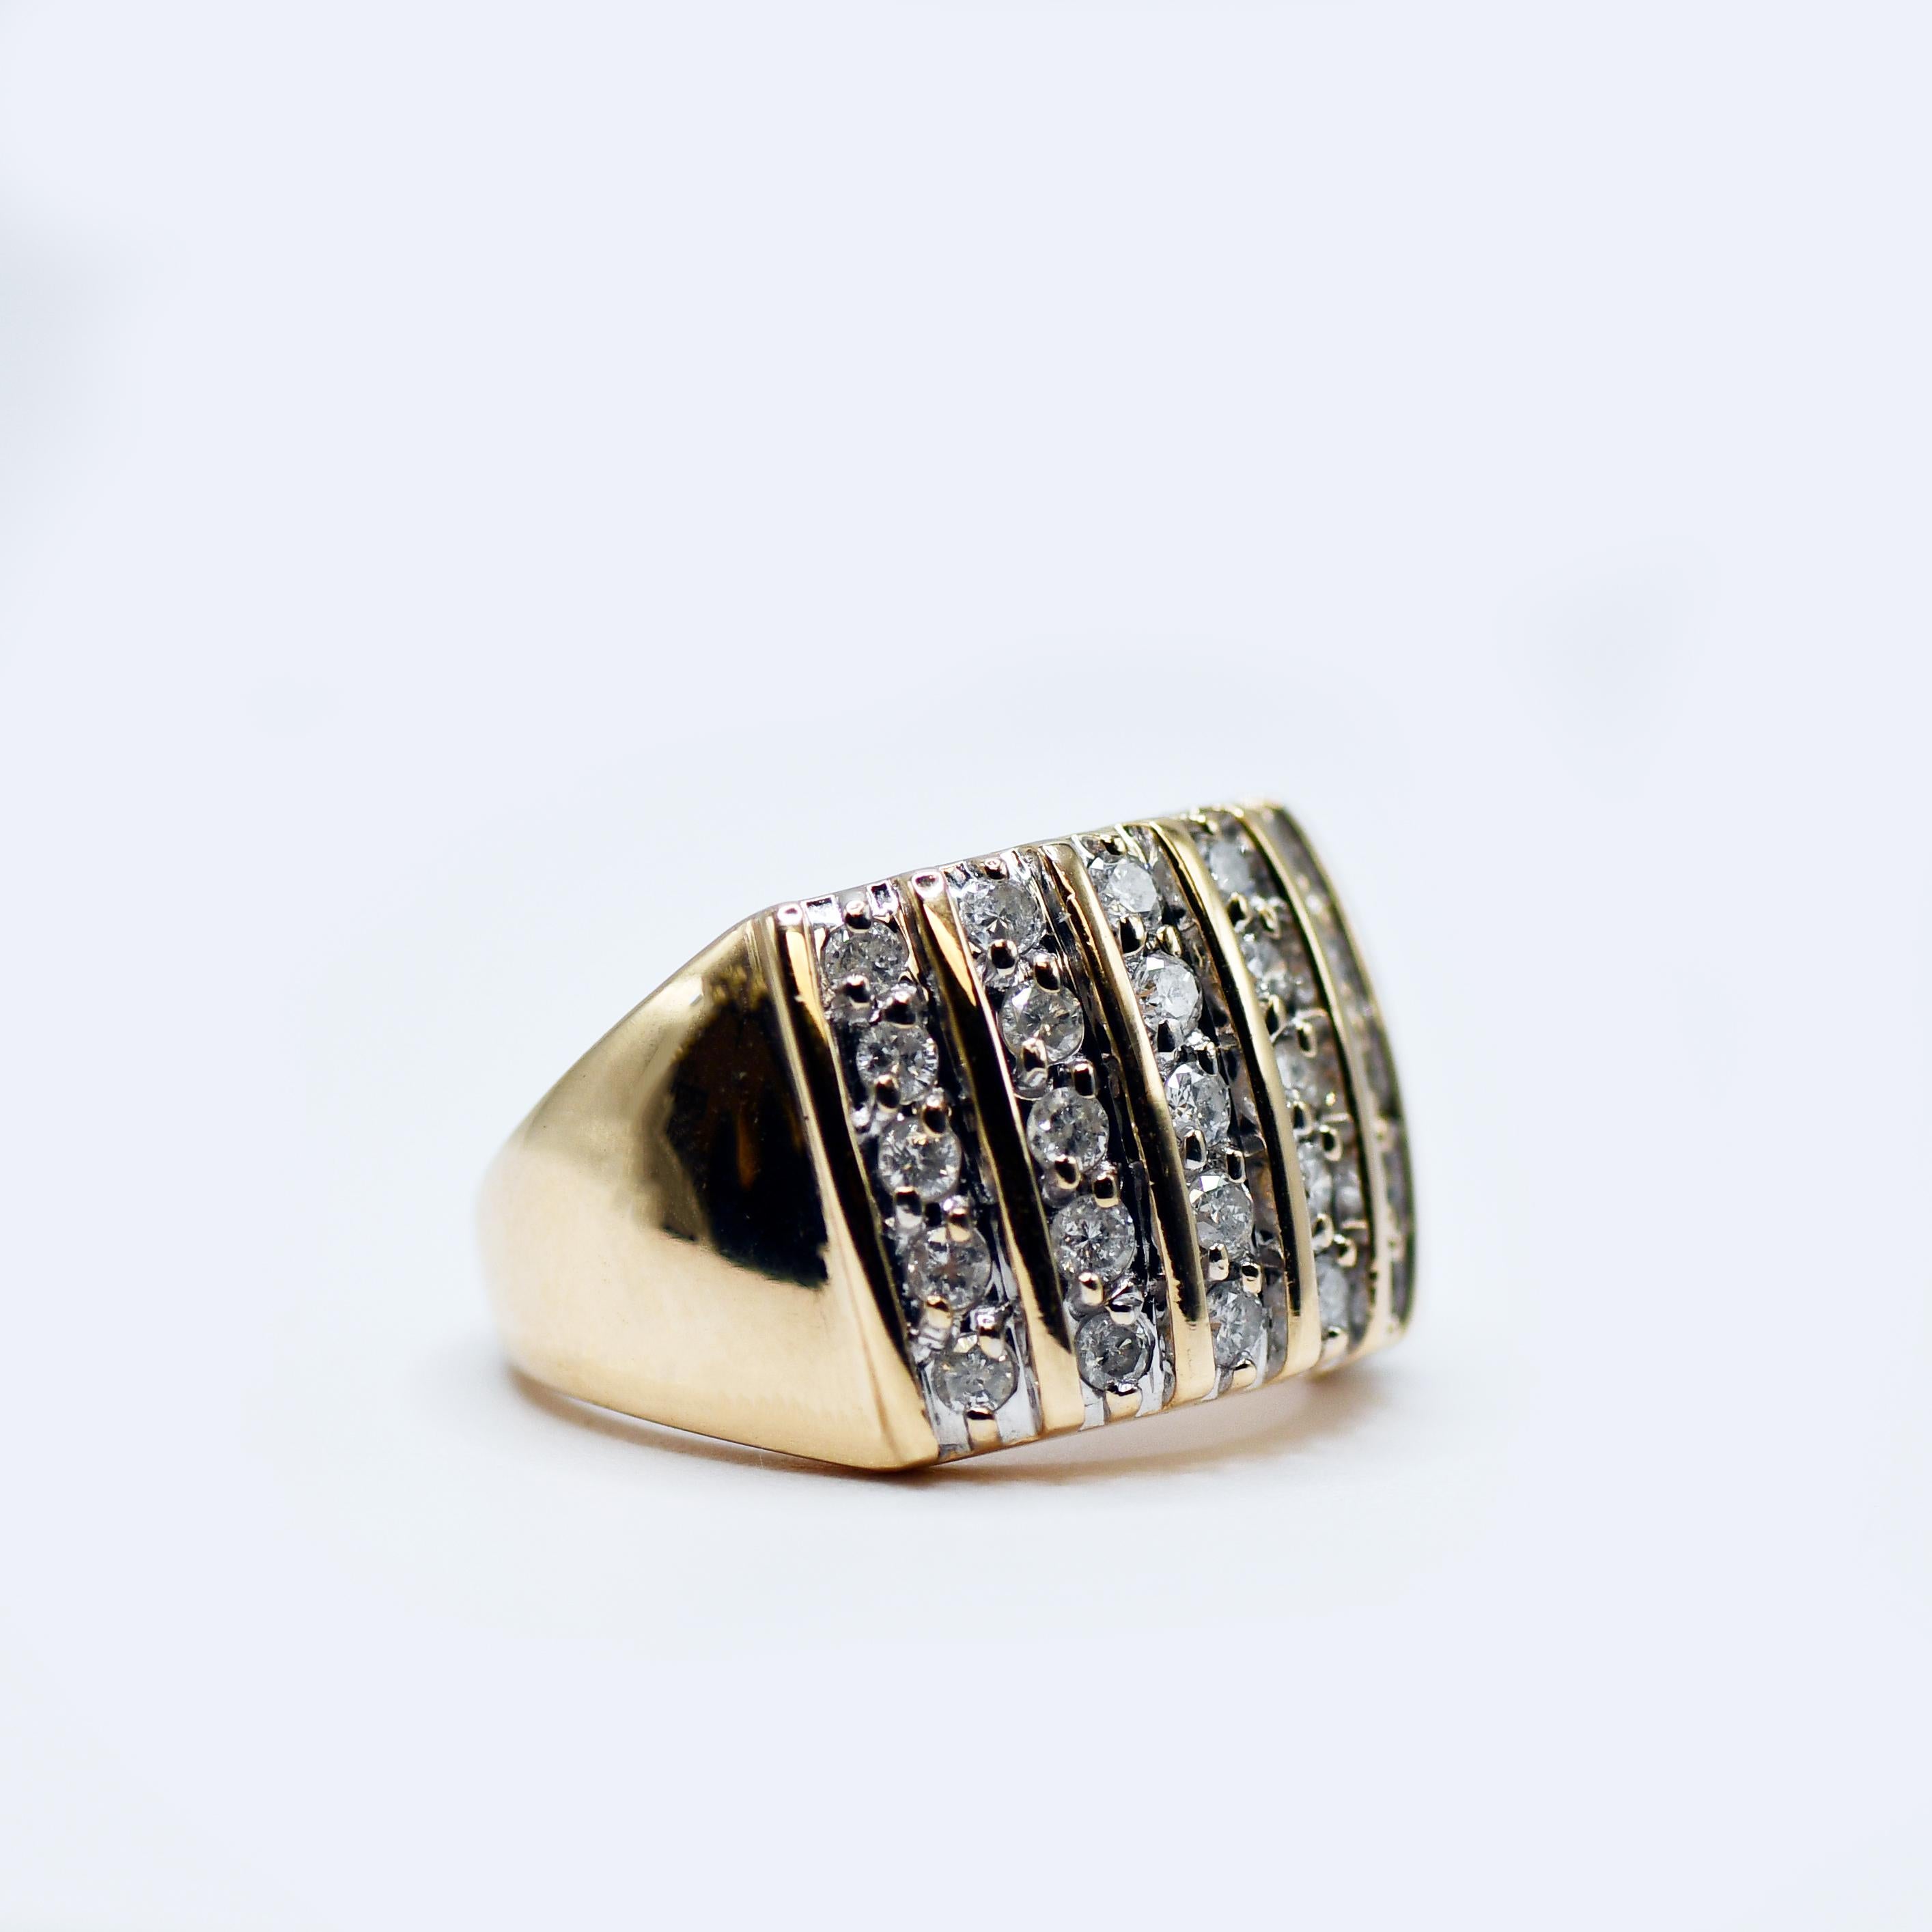 Brilliant Cut 14K Yellow Gold Diamond Cocktail Ring, 1.00TDW, 8.6g For Sale